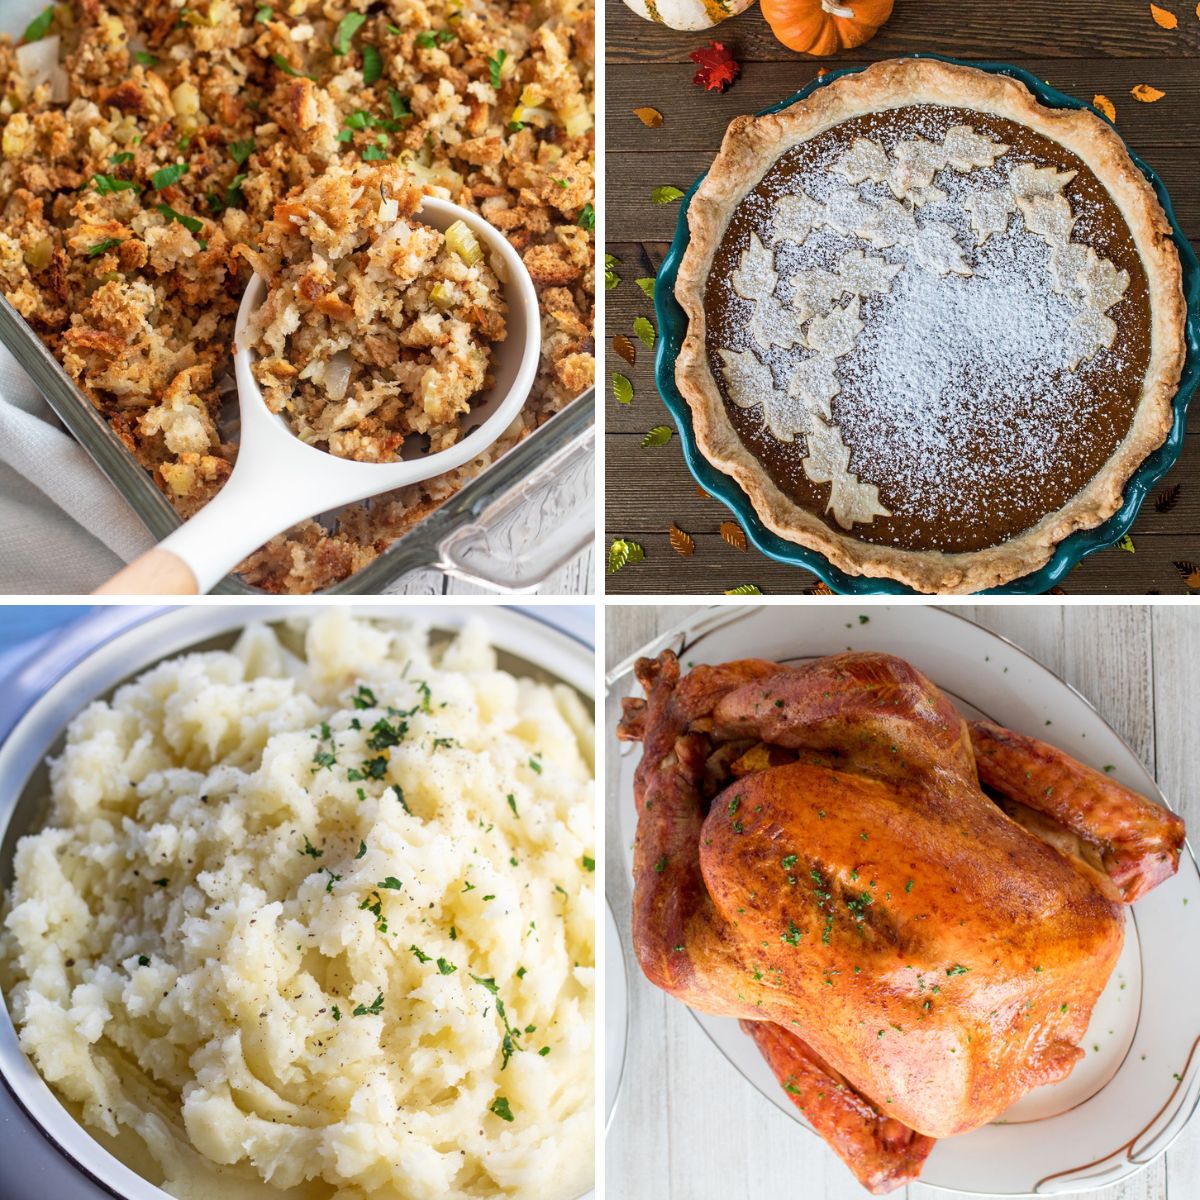 Square collage image with 4 quadrants showing images of Thanksgivings recipes.